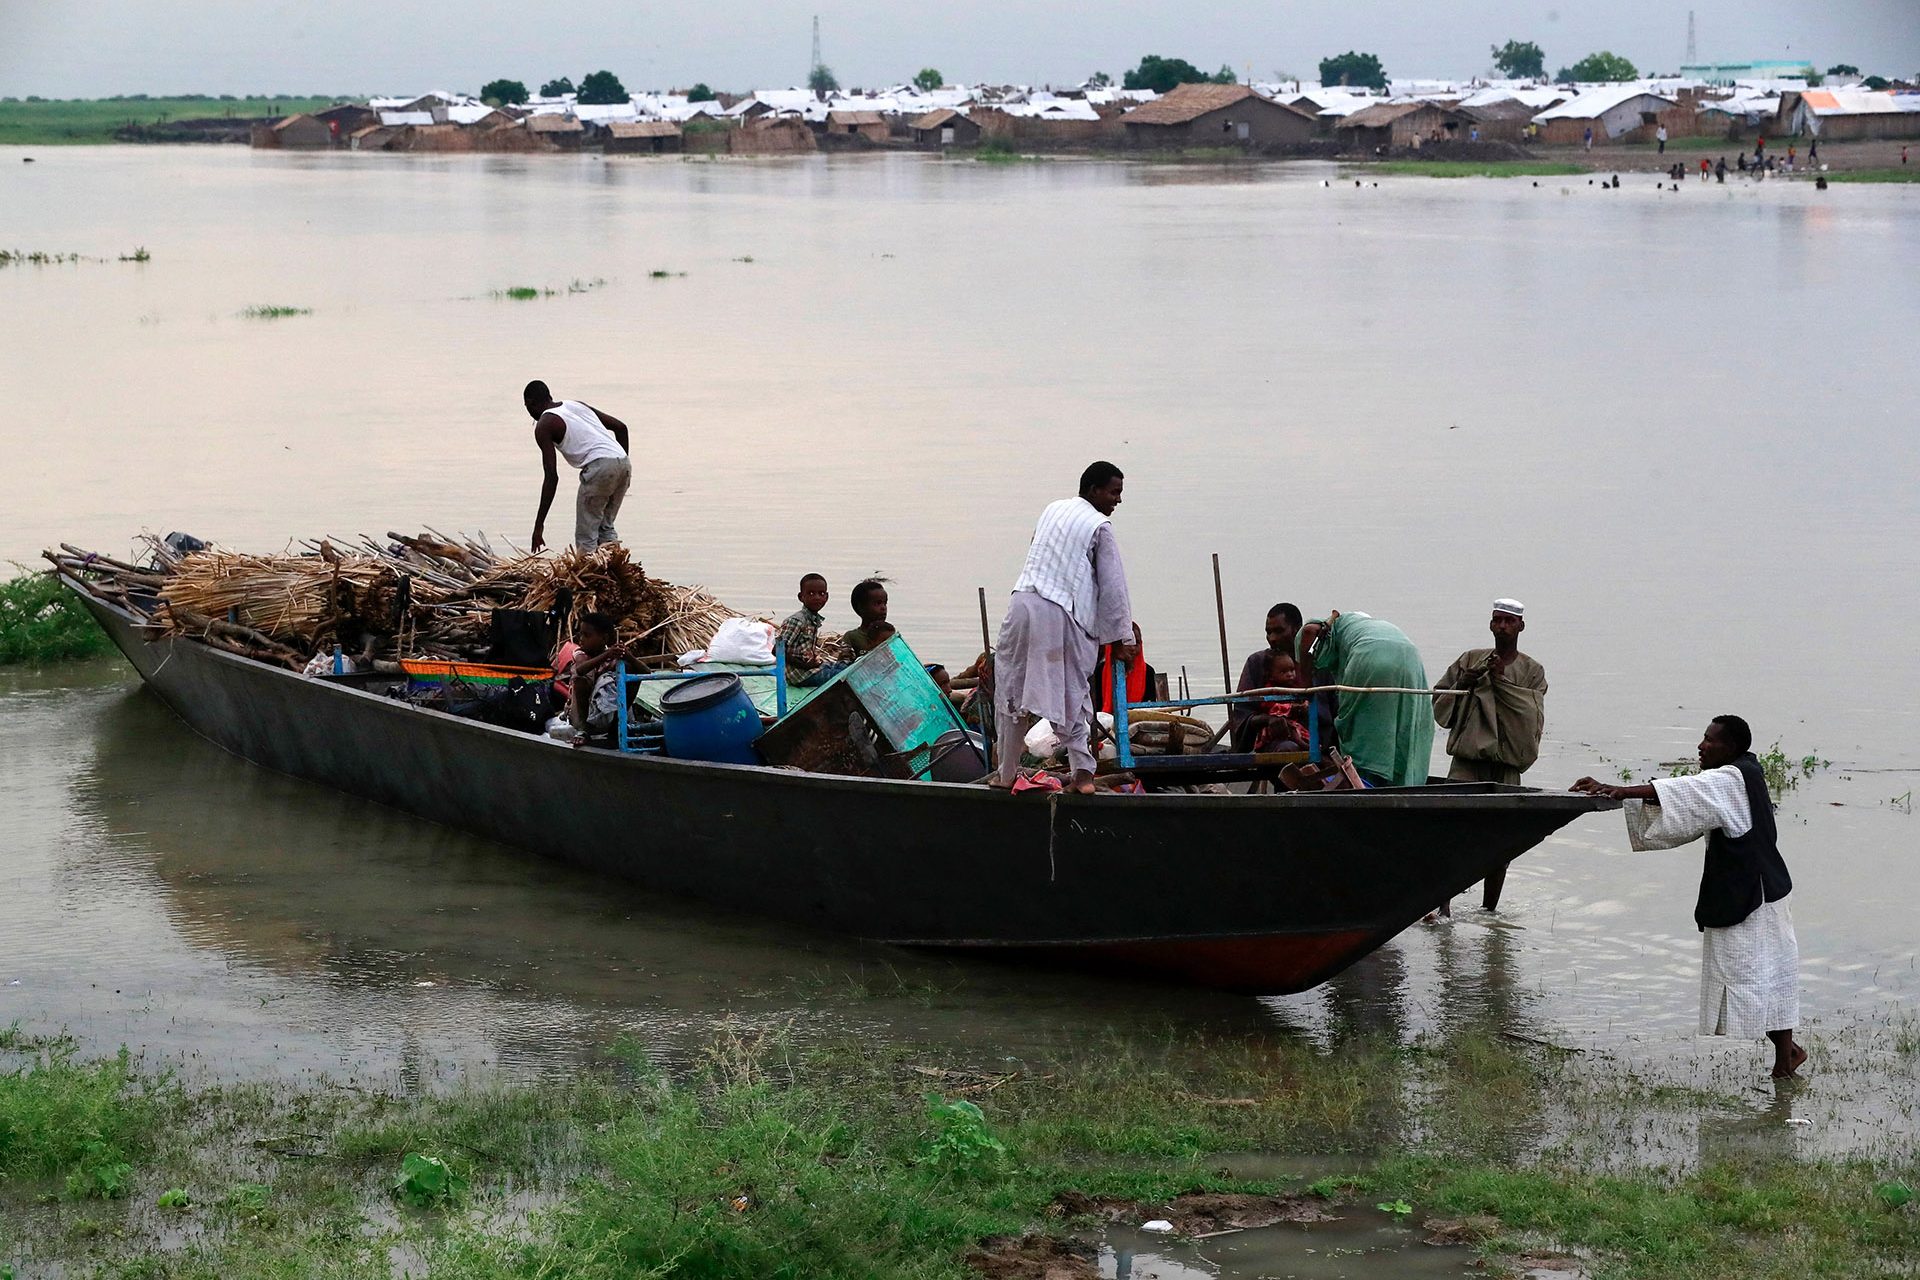 Significant loss of flow as it passes through Sudan